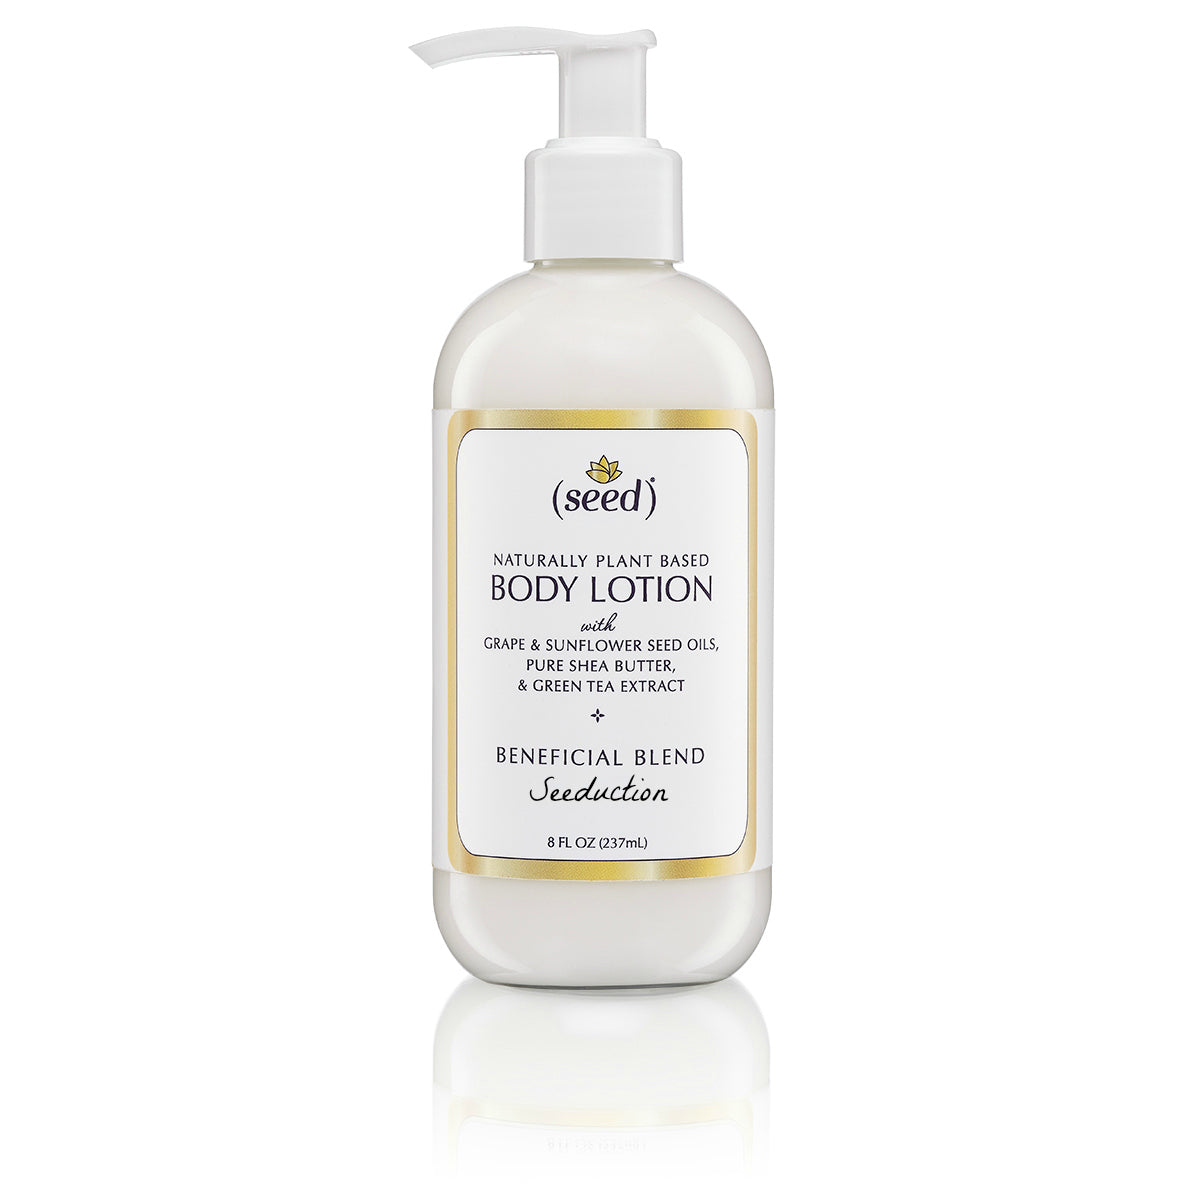 Seed Seeduction Blend Body Lotion 16 oz with ginger, patchouli